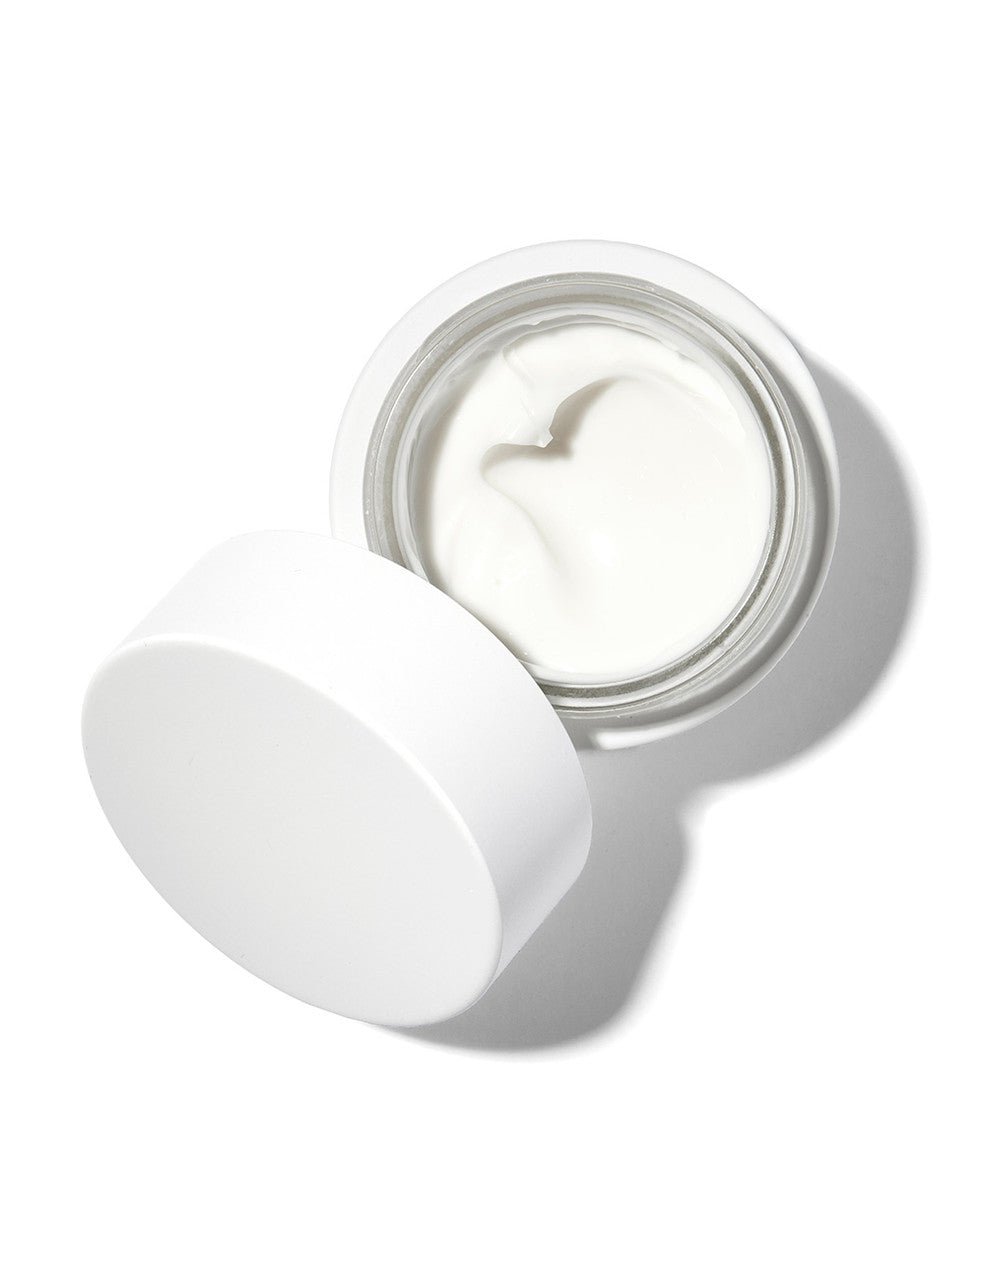 Dr. Barbara Sturm Face Cream Rich with top off